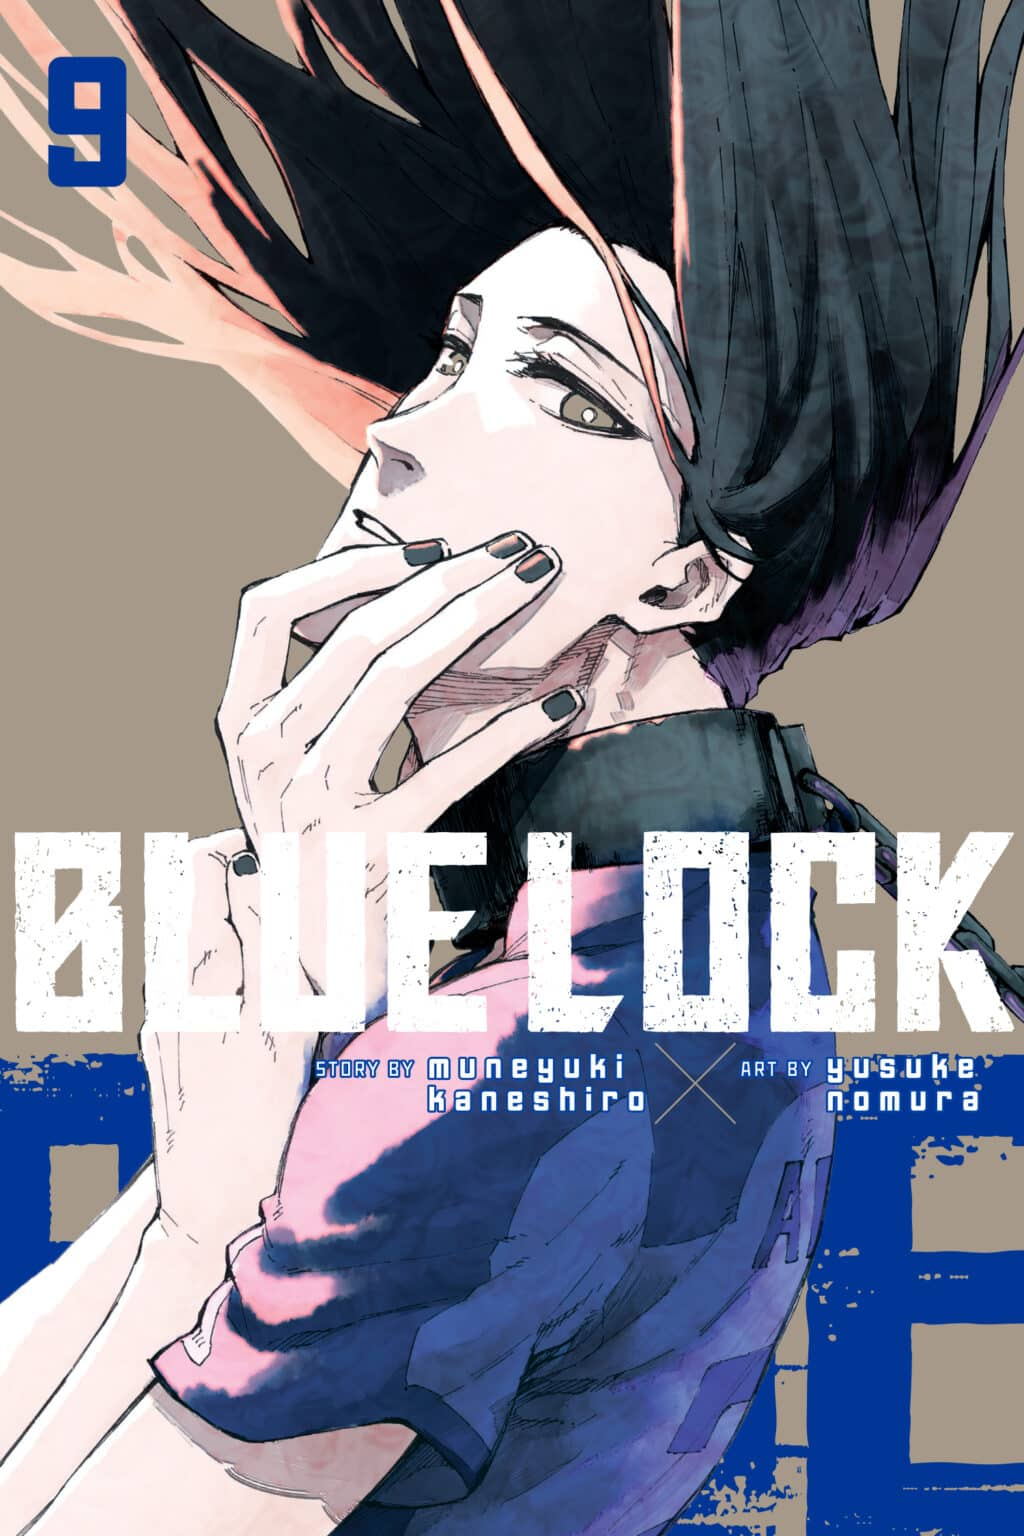 Blue Lock episode 9 release date, time and preview for 'Awakening